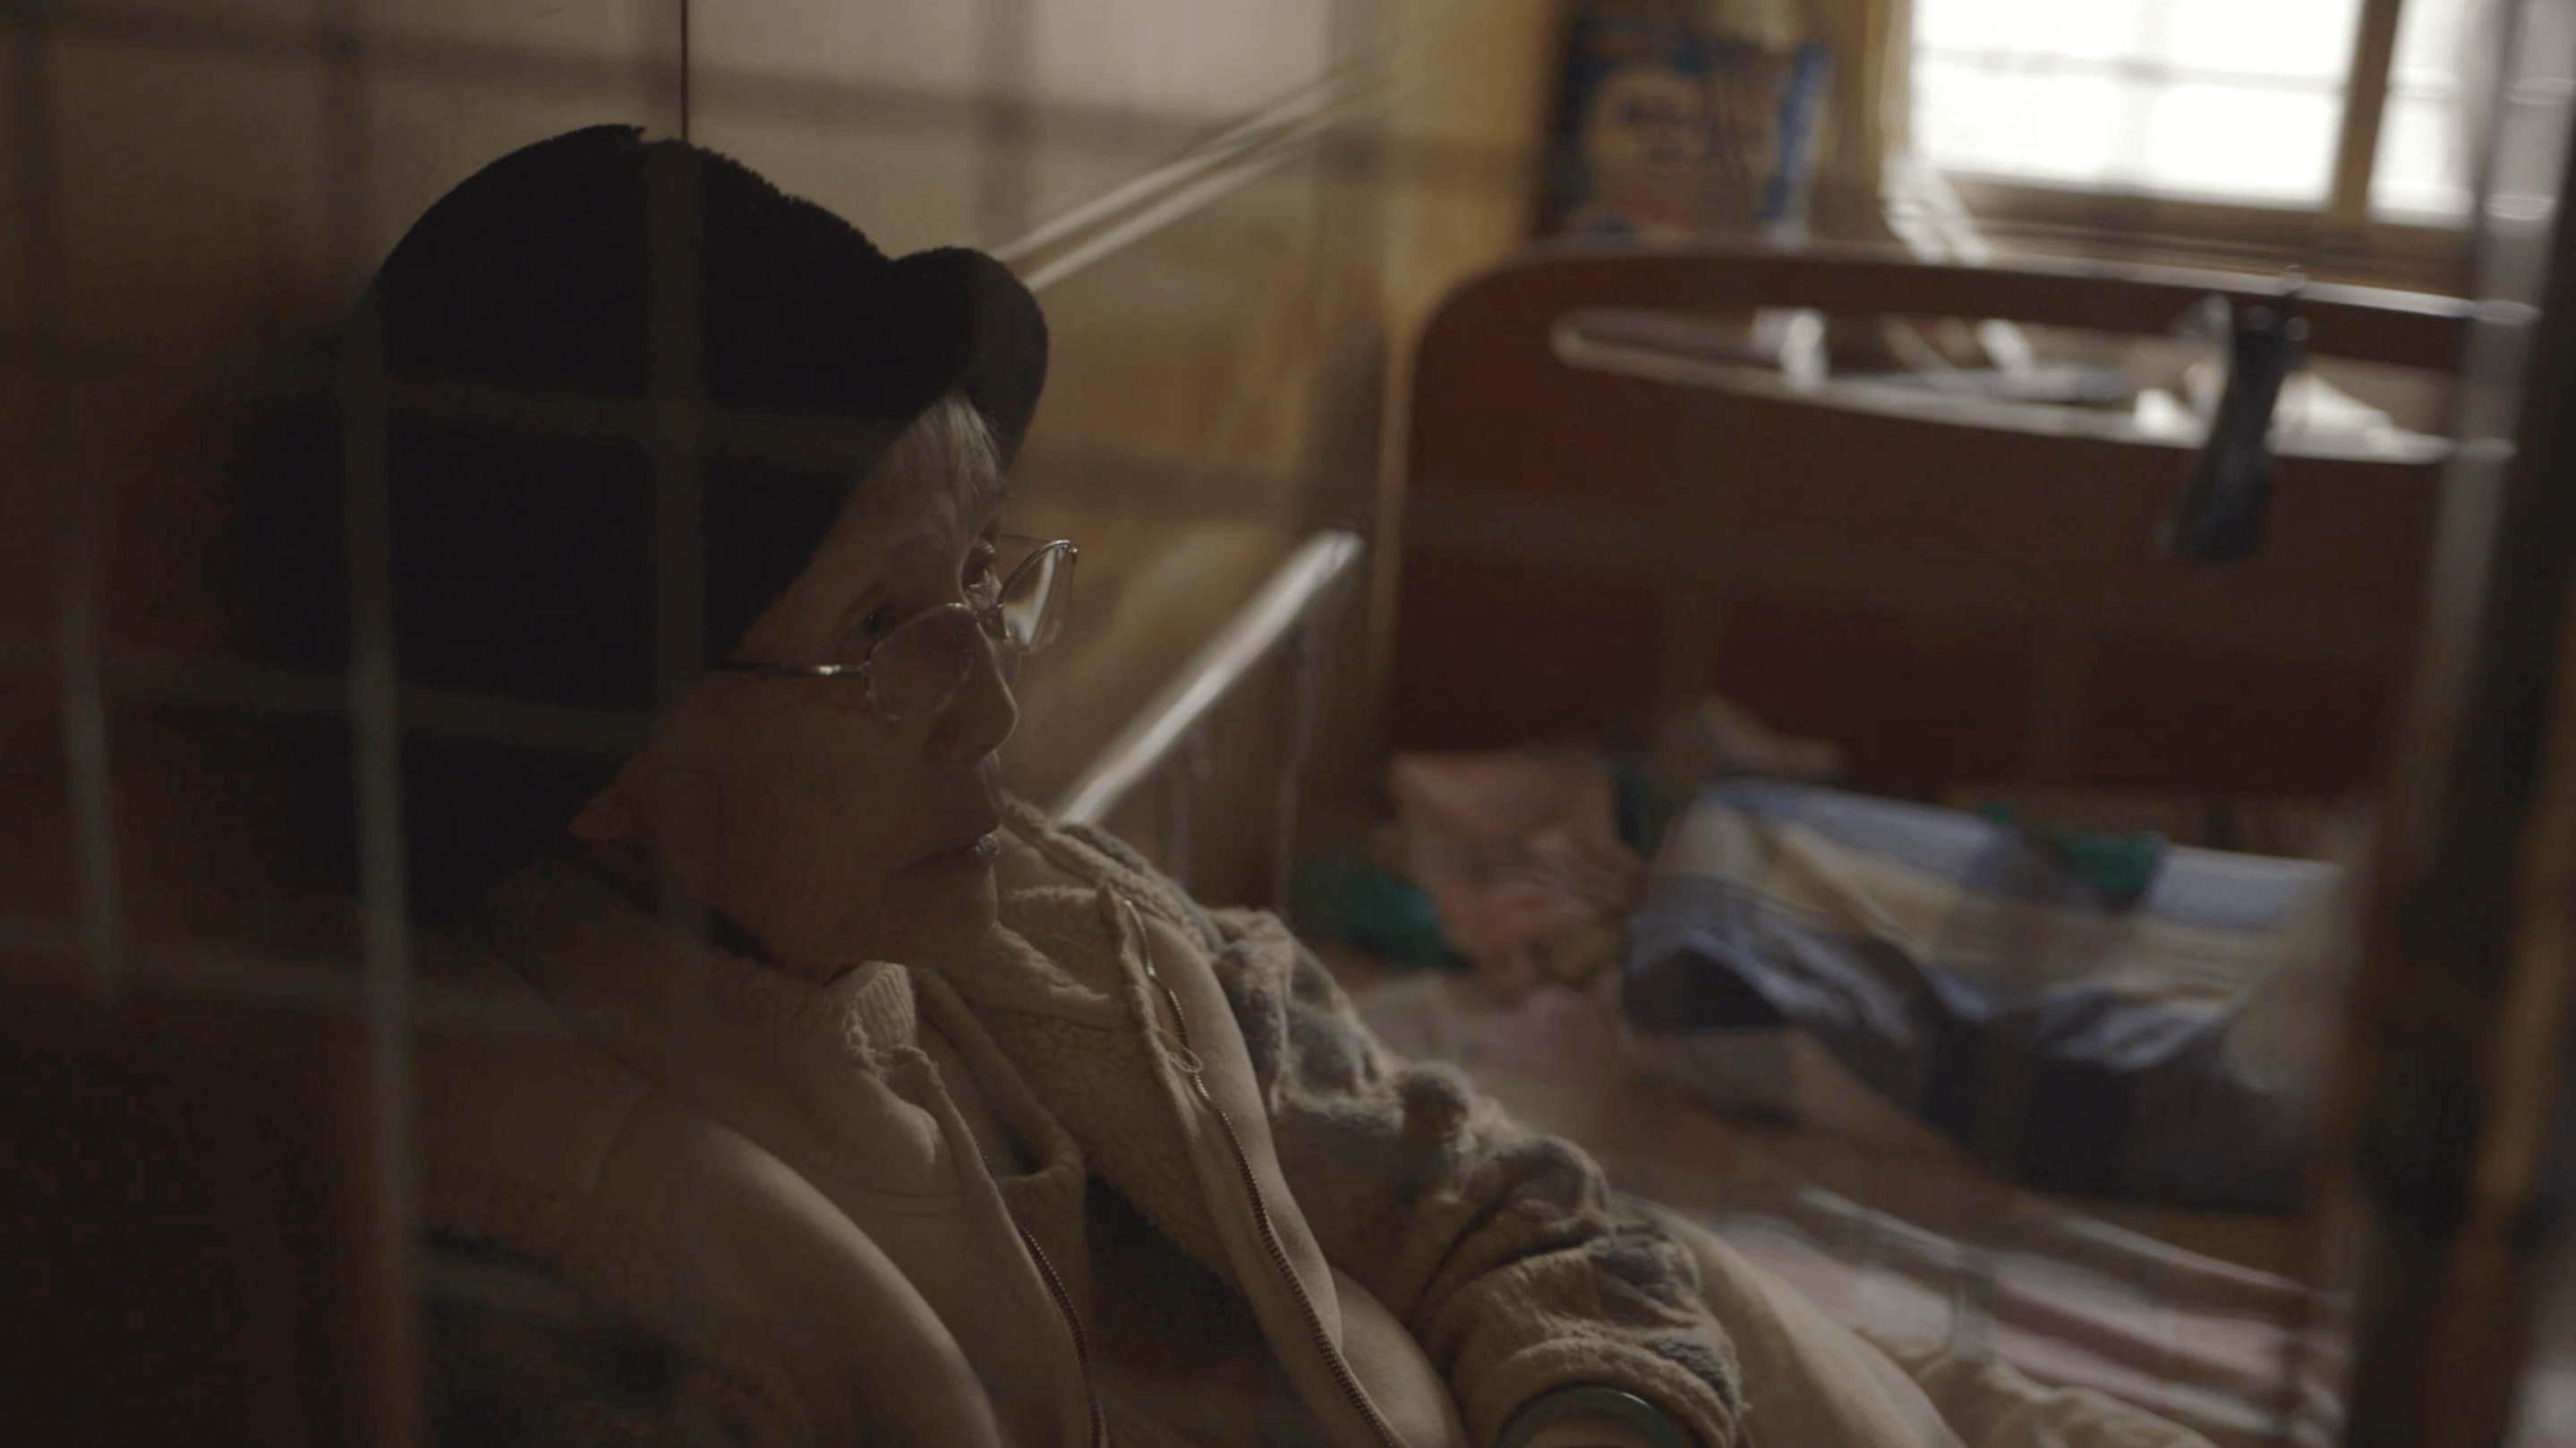 An older, Taiwanese woman with a black hat and glasses sits on her bed, behind a blurry grate in the foregound.